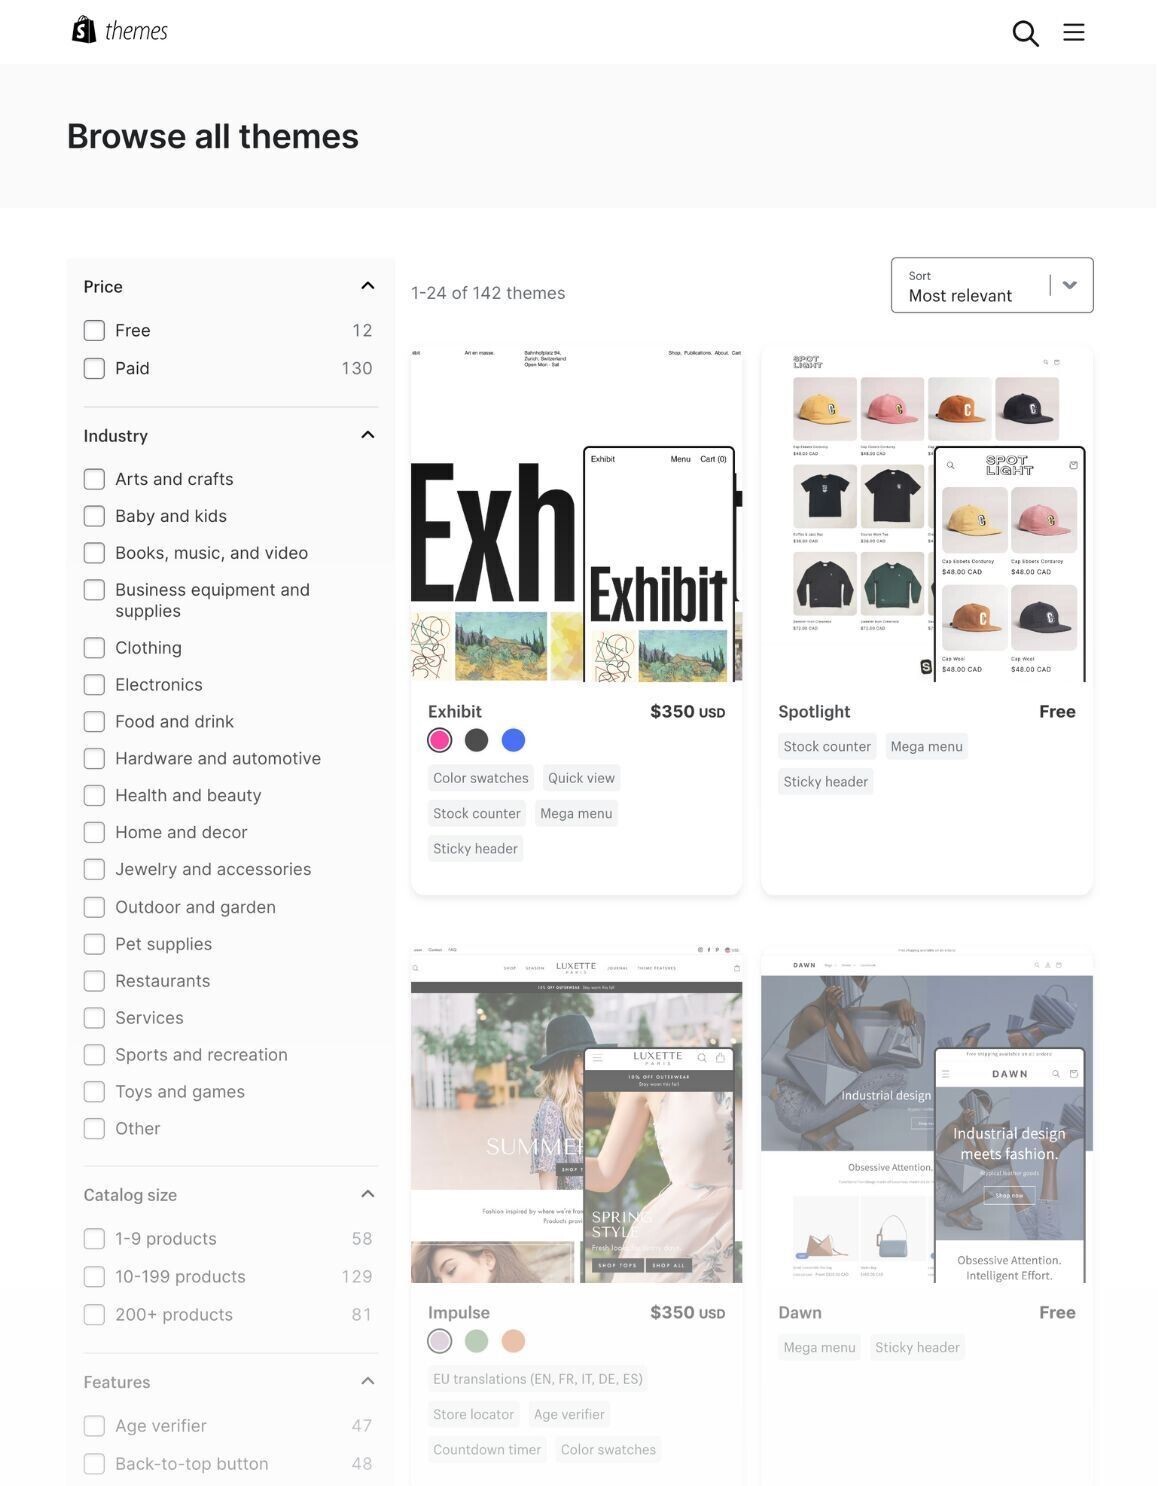 Shopify offers more than 140 themes for storefront design